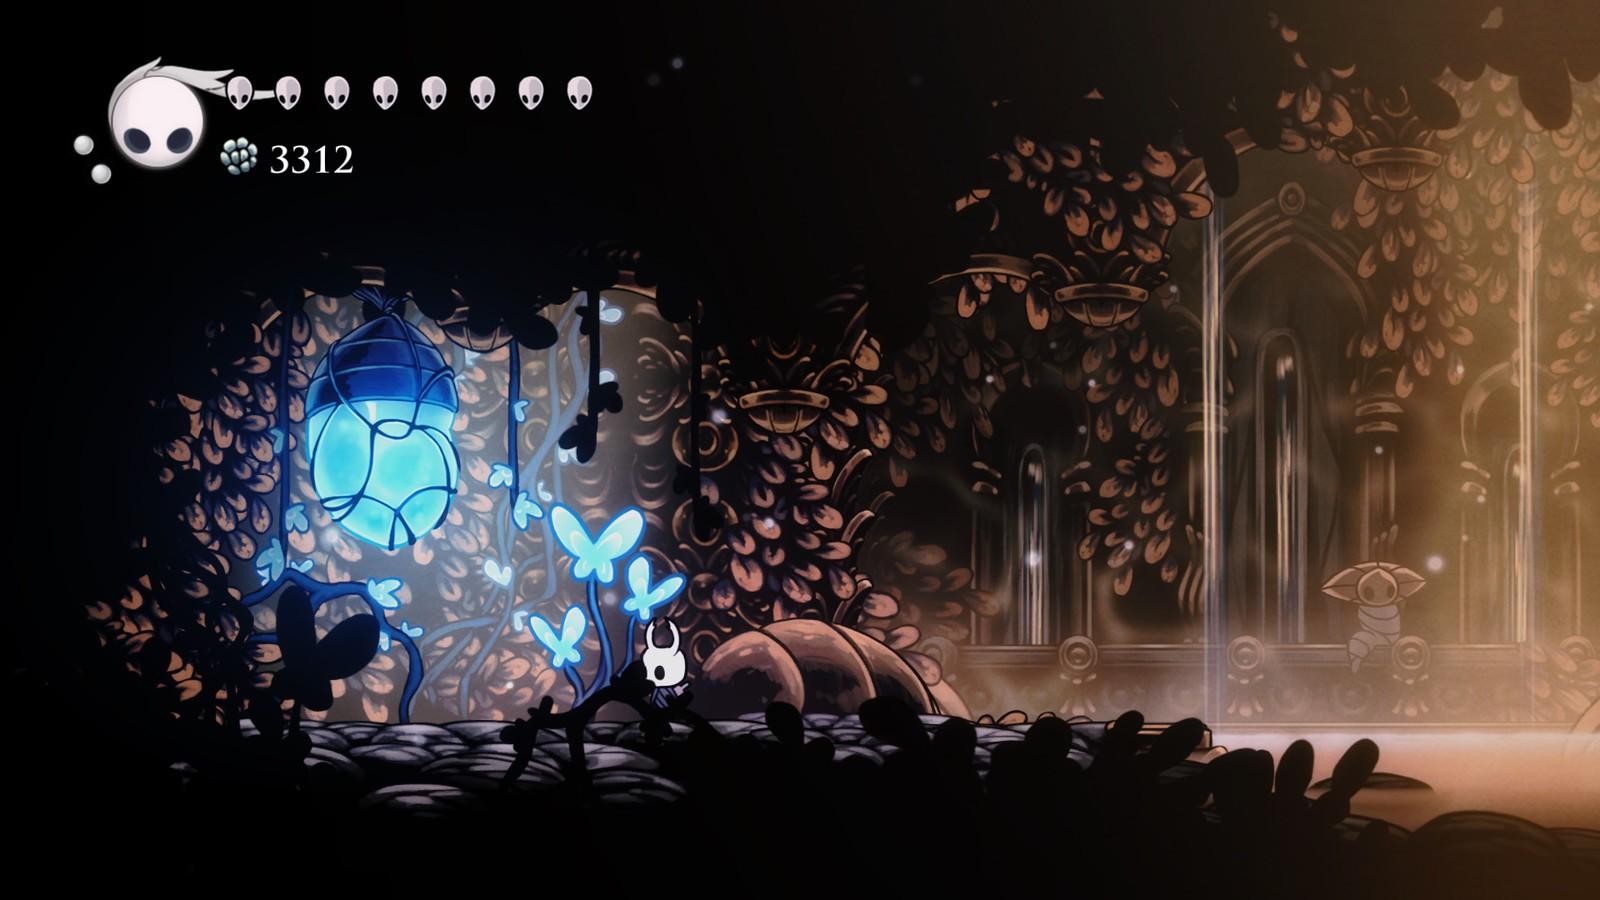 What's new in Hollow Knight: Voidheart Edition?